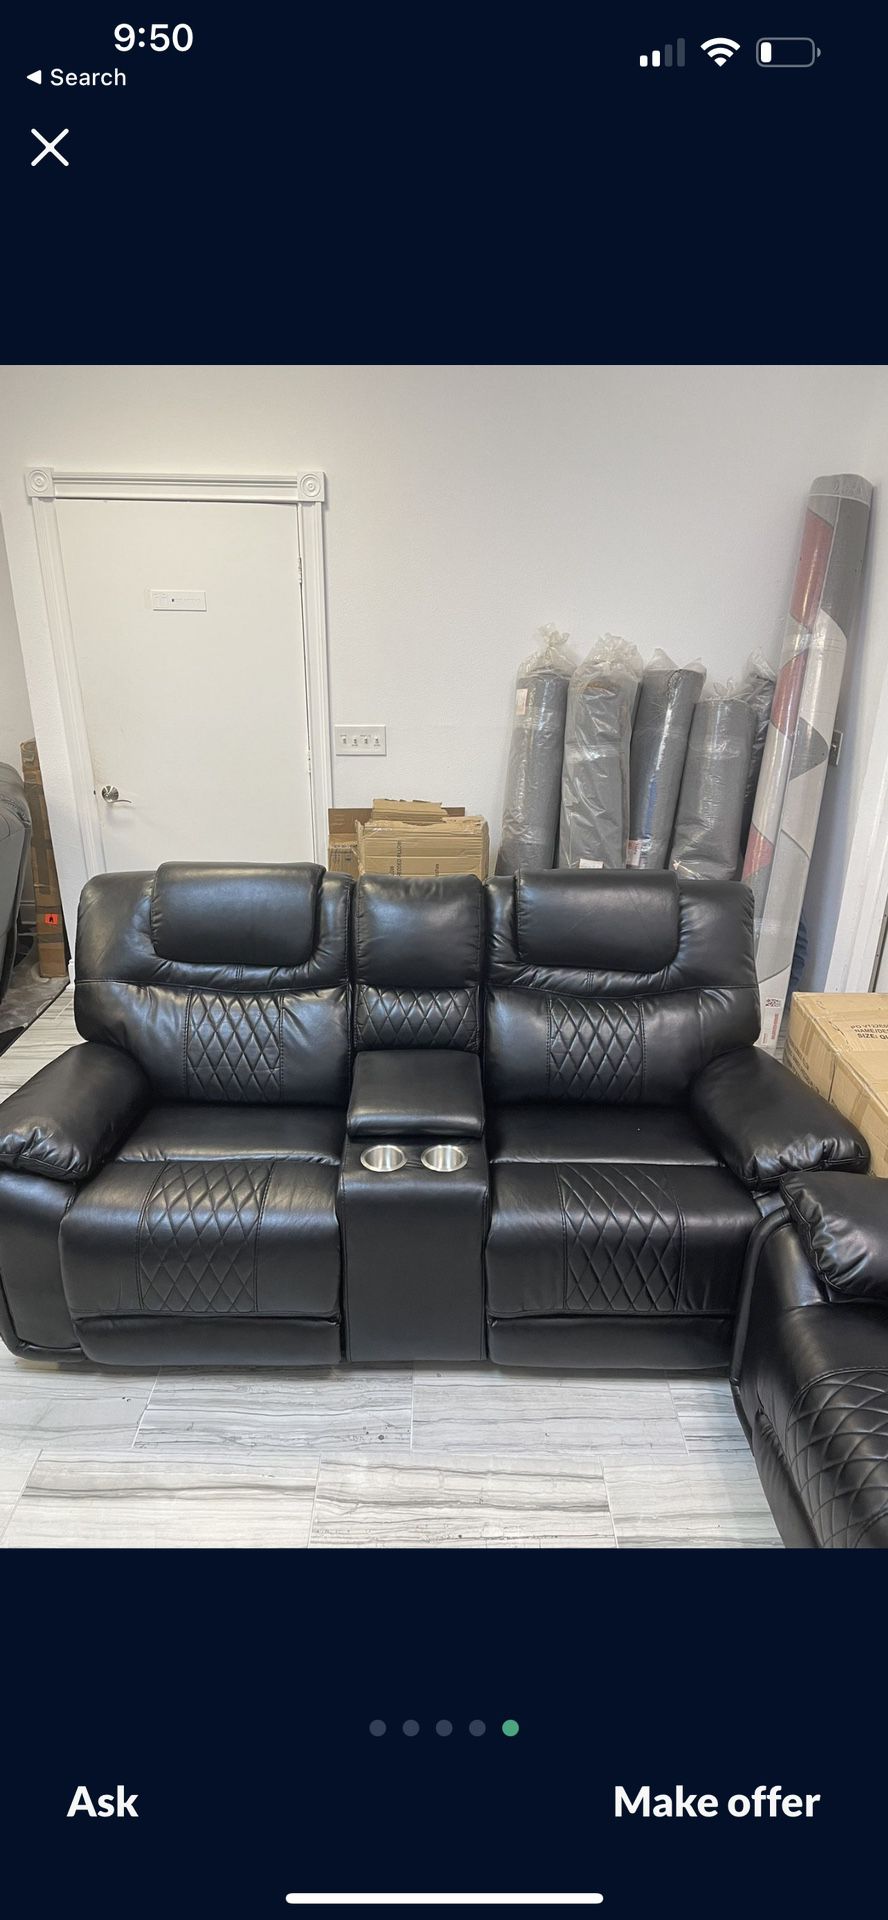 GORGEOUS BLACK SANTIAGO SOFA AND LOVESEAT SET!$999!*SAME DAY DELIVERY*NO CREDIT NEEDED*EASY FINANCING*HUGE SALE*